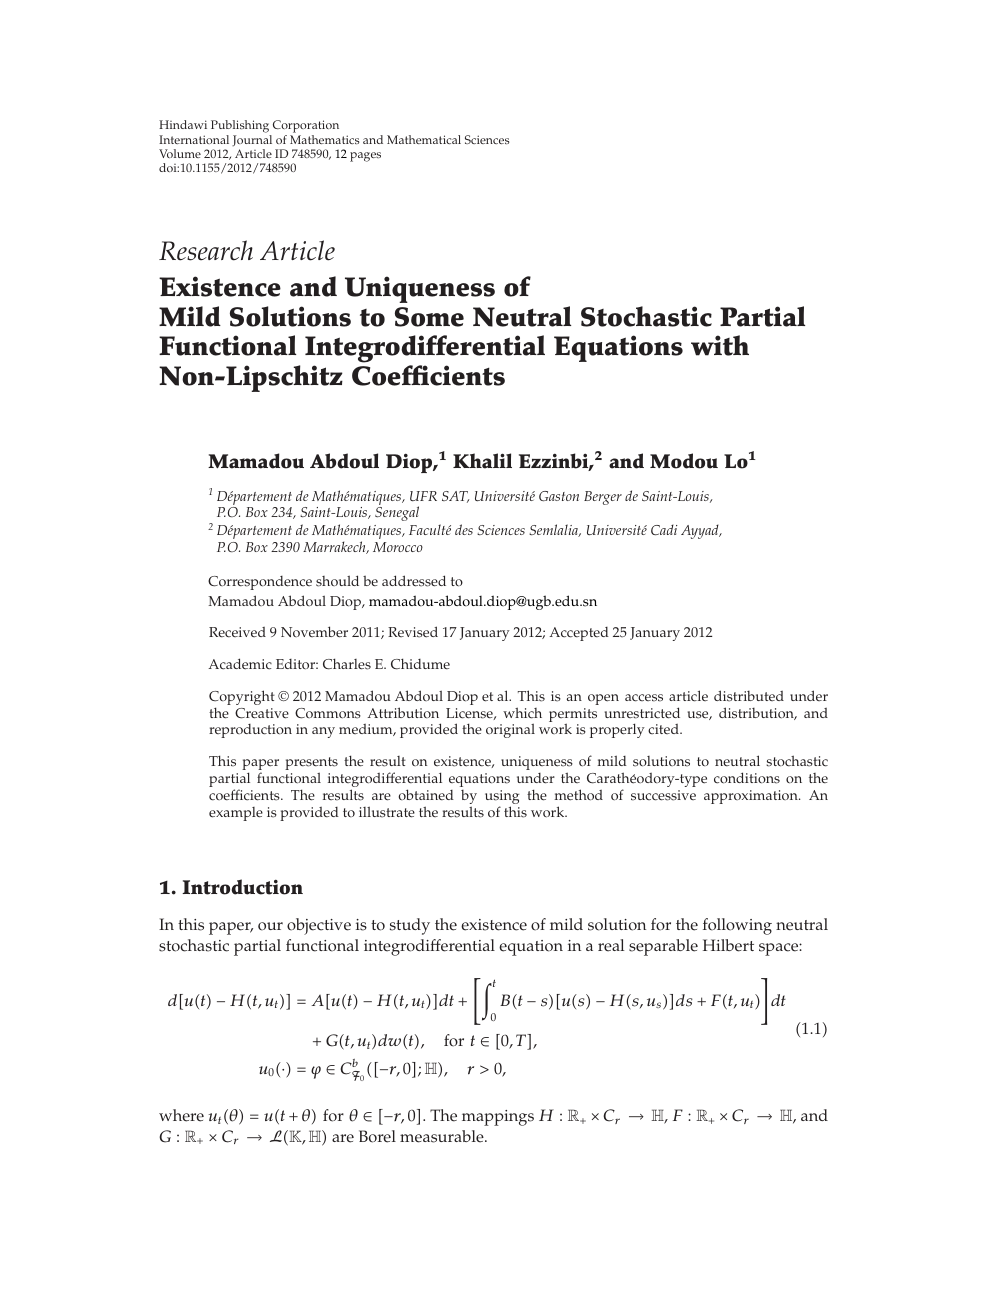 Existence And Uniqueness Of Mild Solutions To Some Neutral Stochastic Partial Functional Integrodifferential Equations With Non Lipschitz Coefficients Topic Of Research Paper In Mathematics Download Scholarly Article Pdf And Read For Free